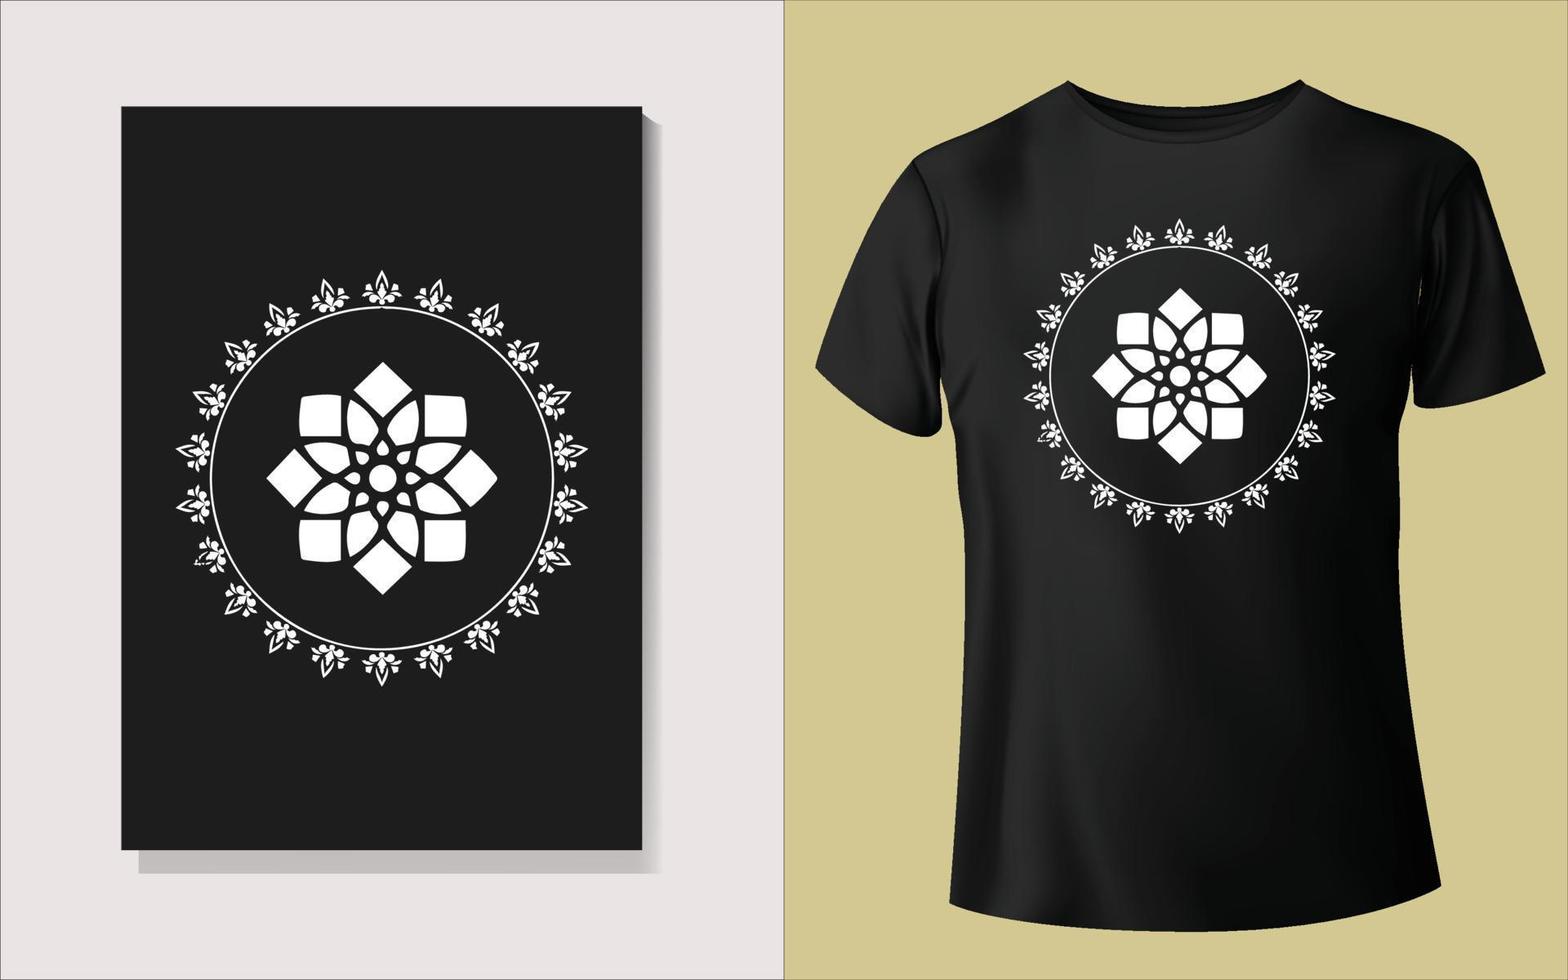 Black and white tee shirt design vector